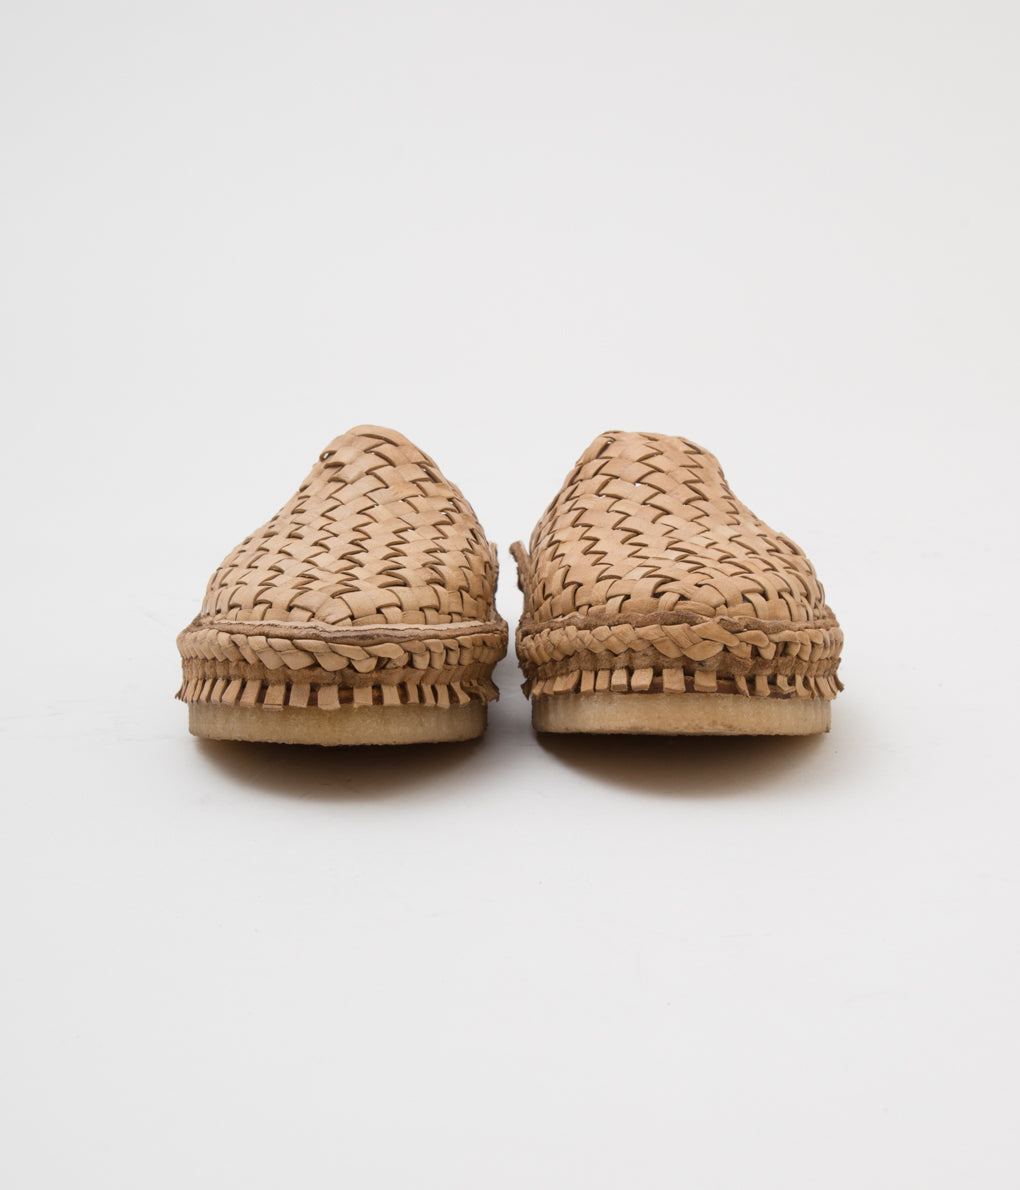 MOHINDERS "WOVEN CITY SLIPPER" (NATURAL)